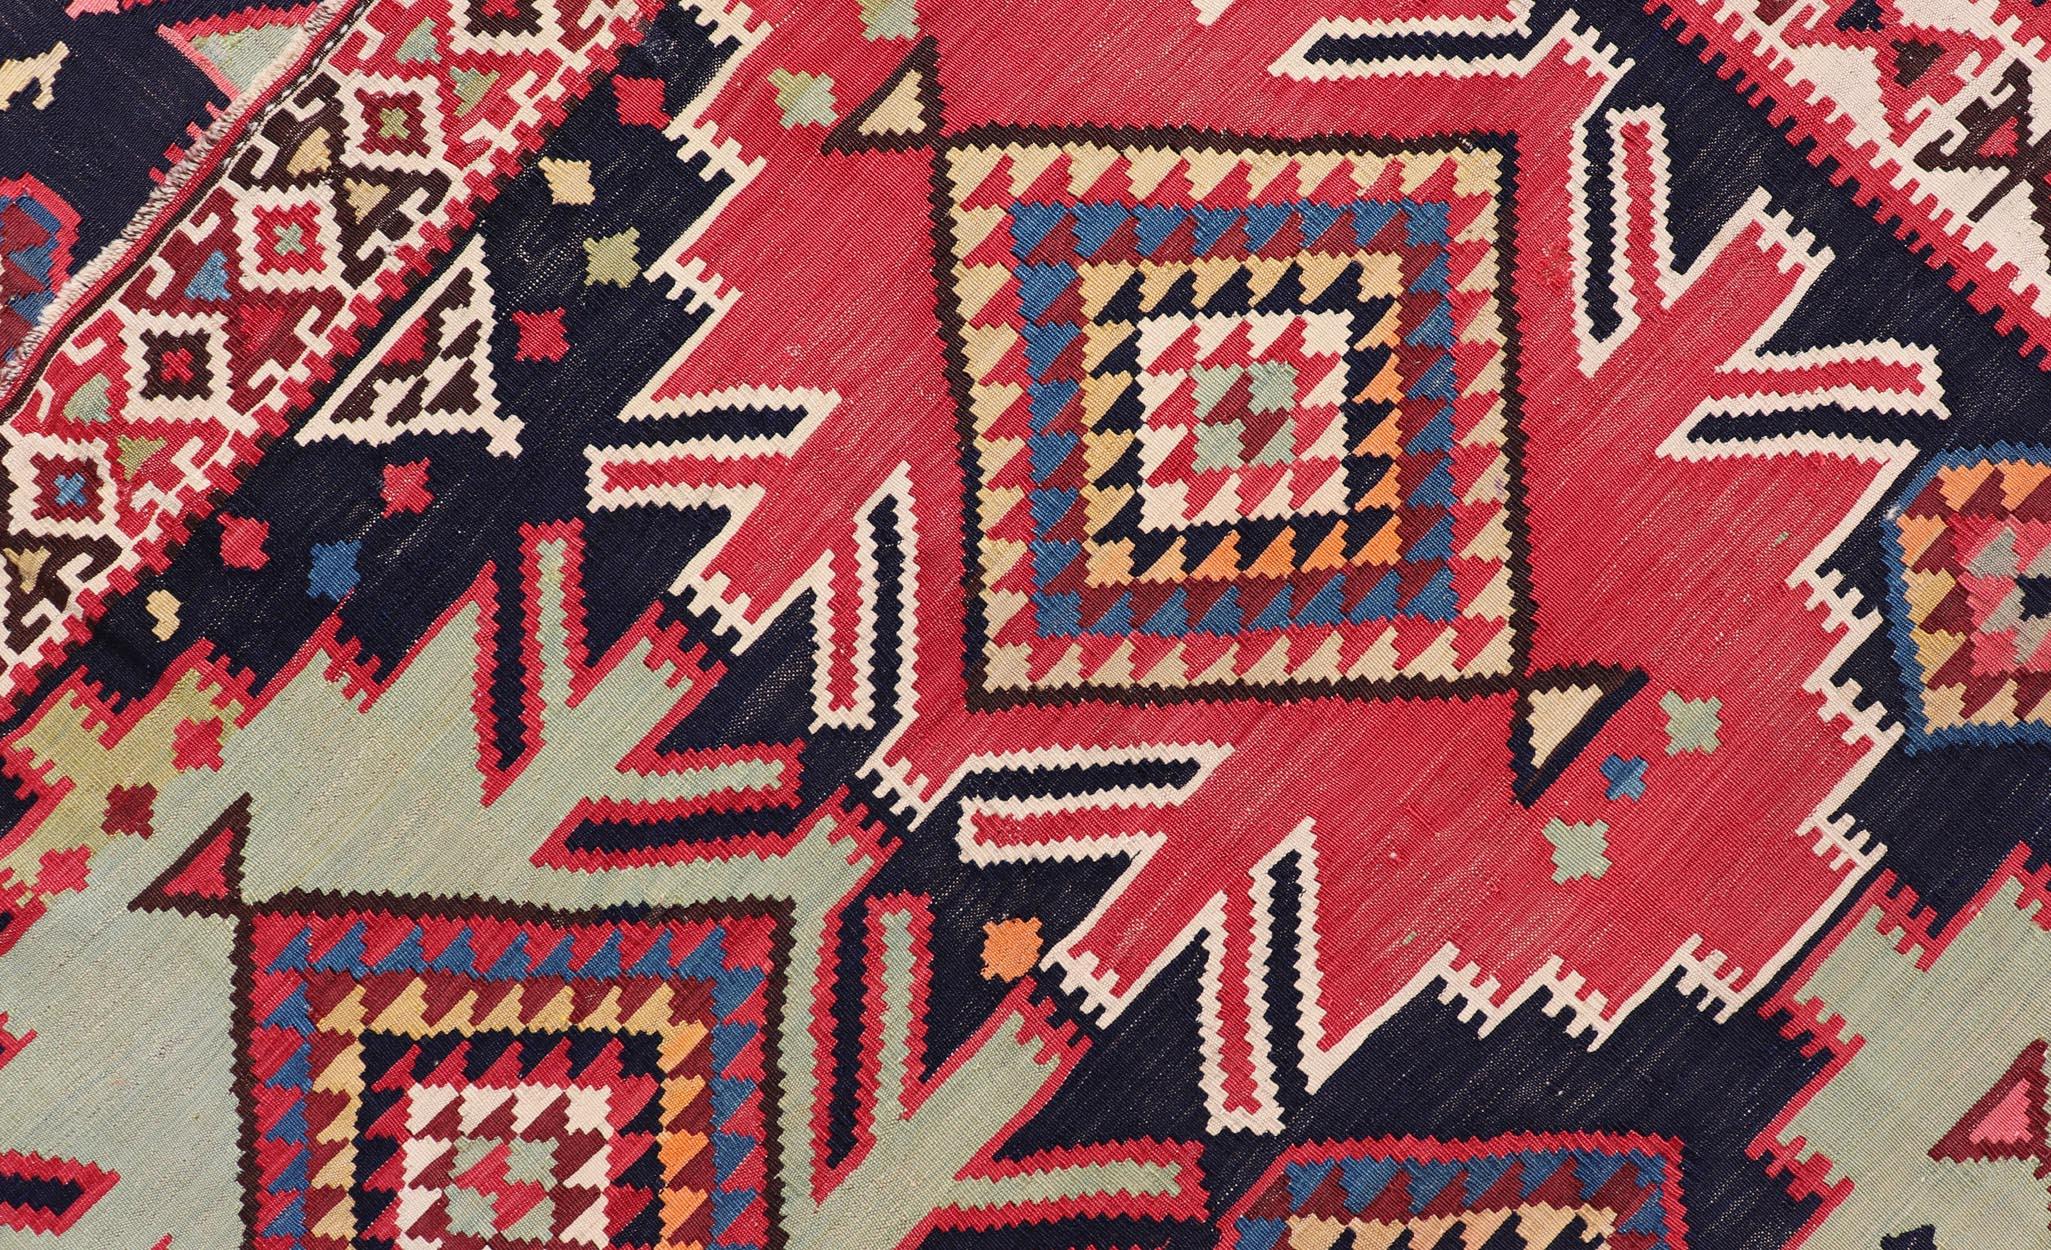 19th Century Antique Kuba Kilim Gallery Rug in with Vibrant Colors In Excellent Condition For Sale In Atlanta, GA